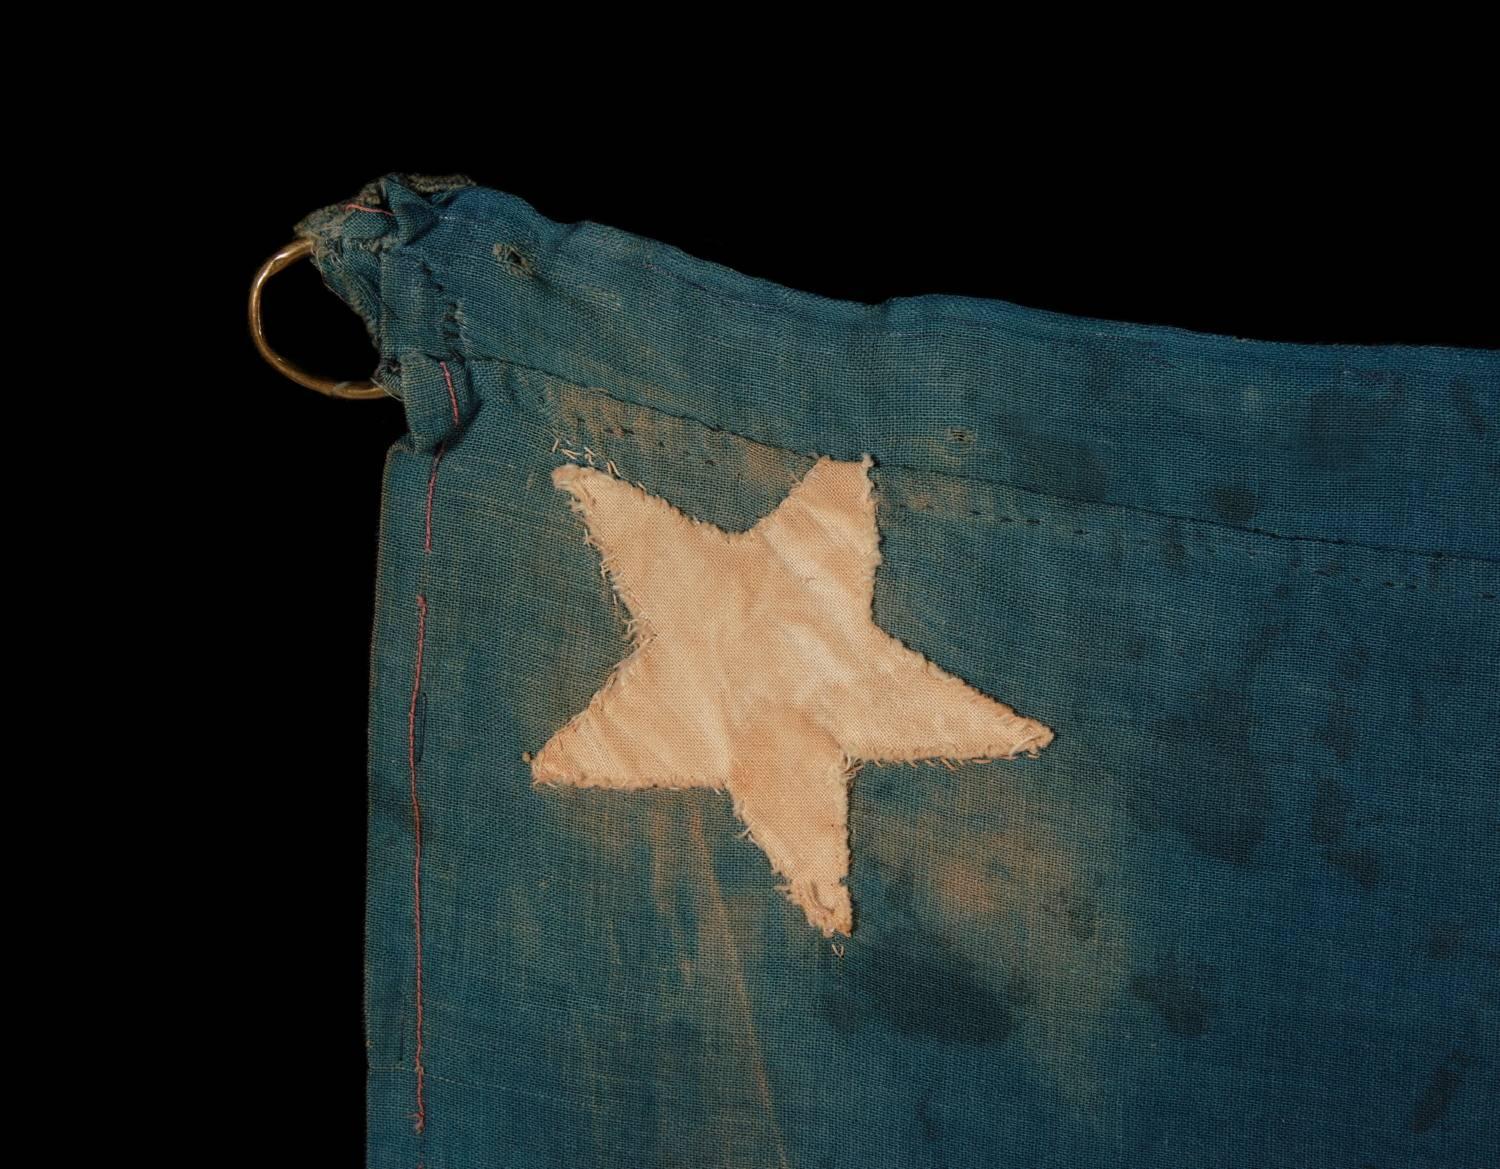 19th Century 13 Hand-Sewn Stars Arranged in A 3-2-3-2-3 Pattern, Homemade, Dating to 1876